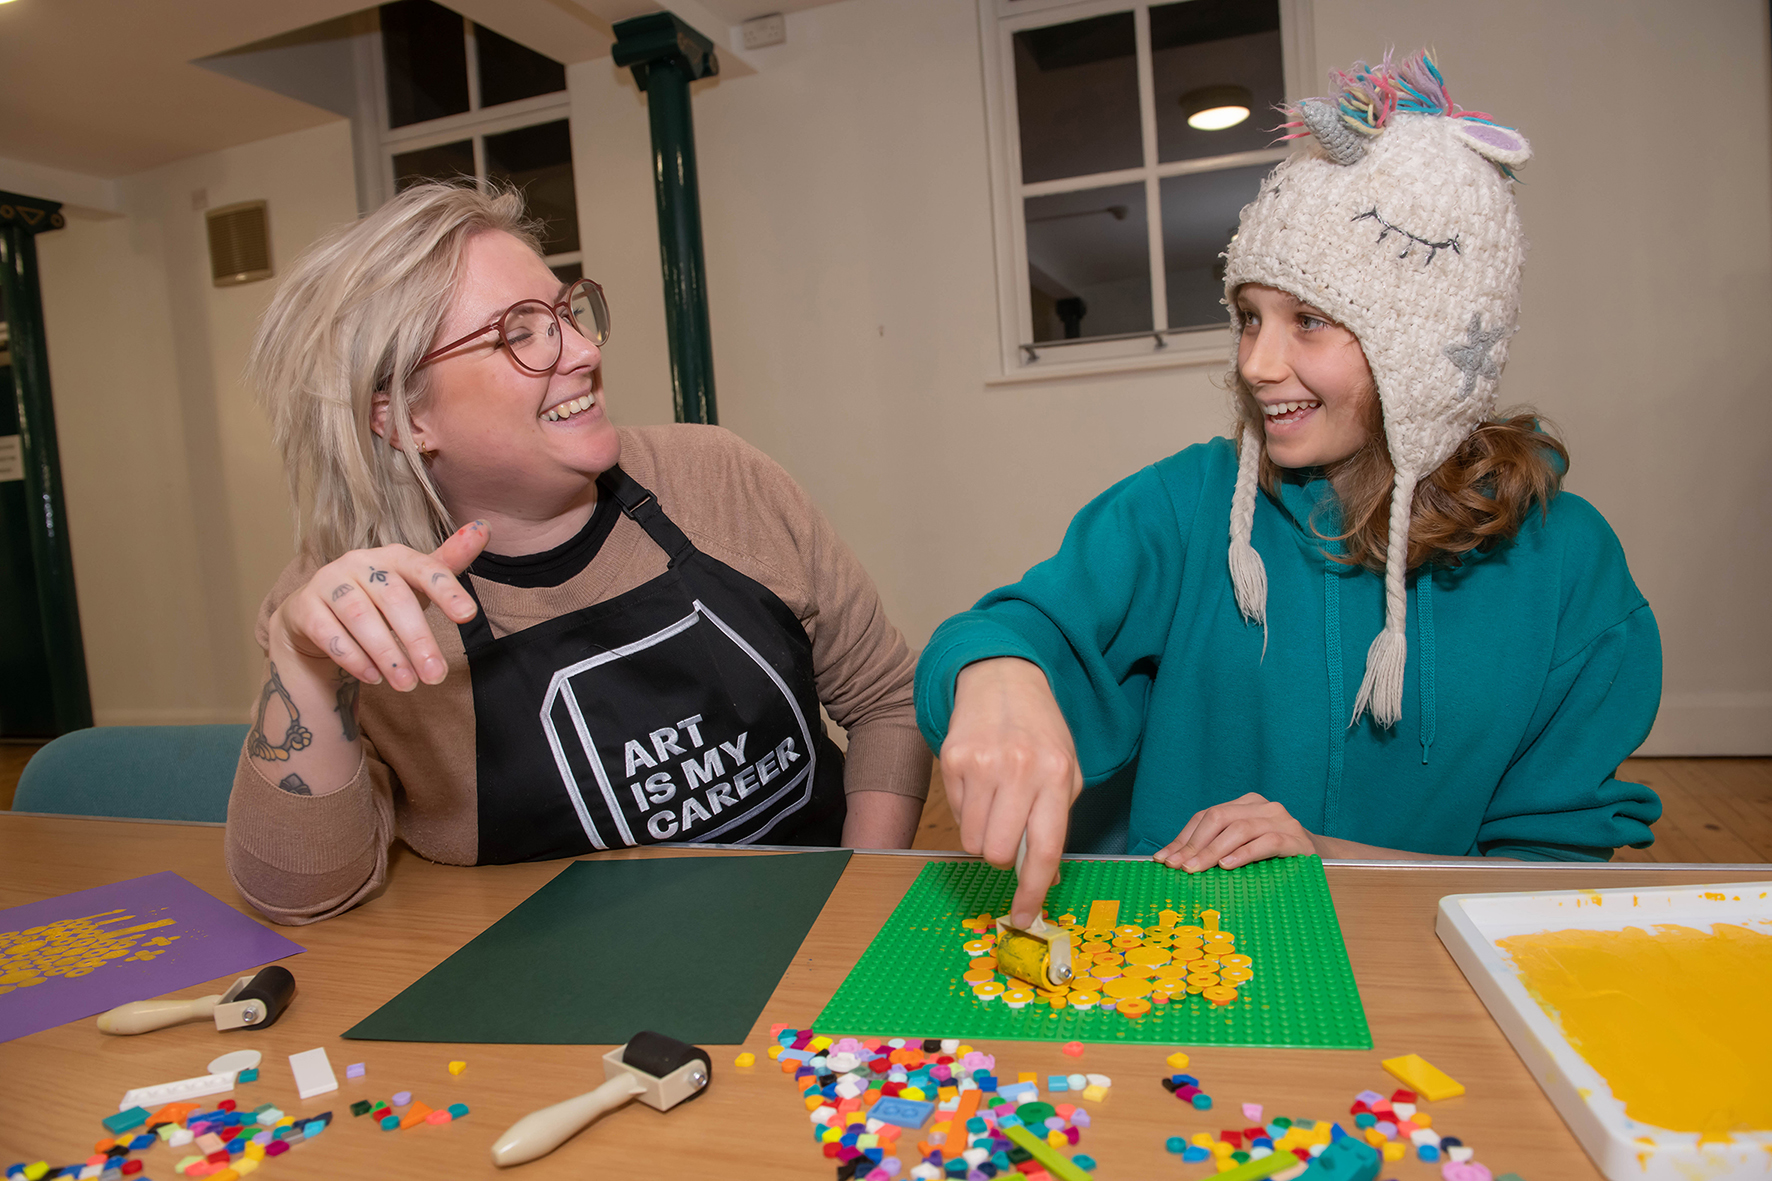 1.	Robyn Corrigan, aged 12, creates artwork at the Lego workshop in Selby with Laura Sanderson.